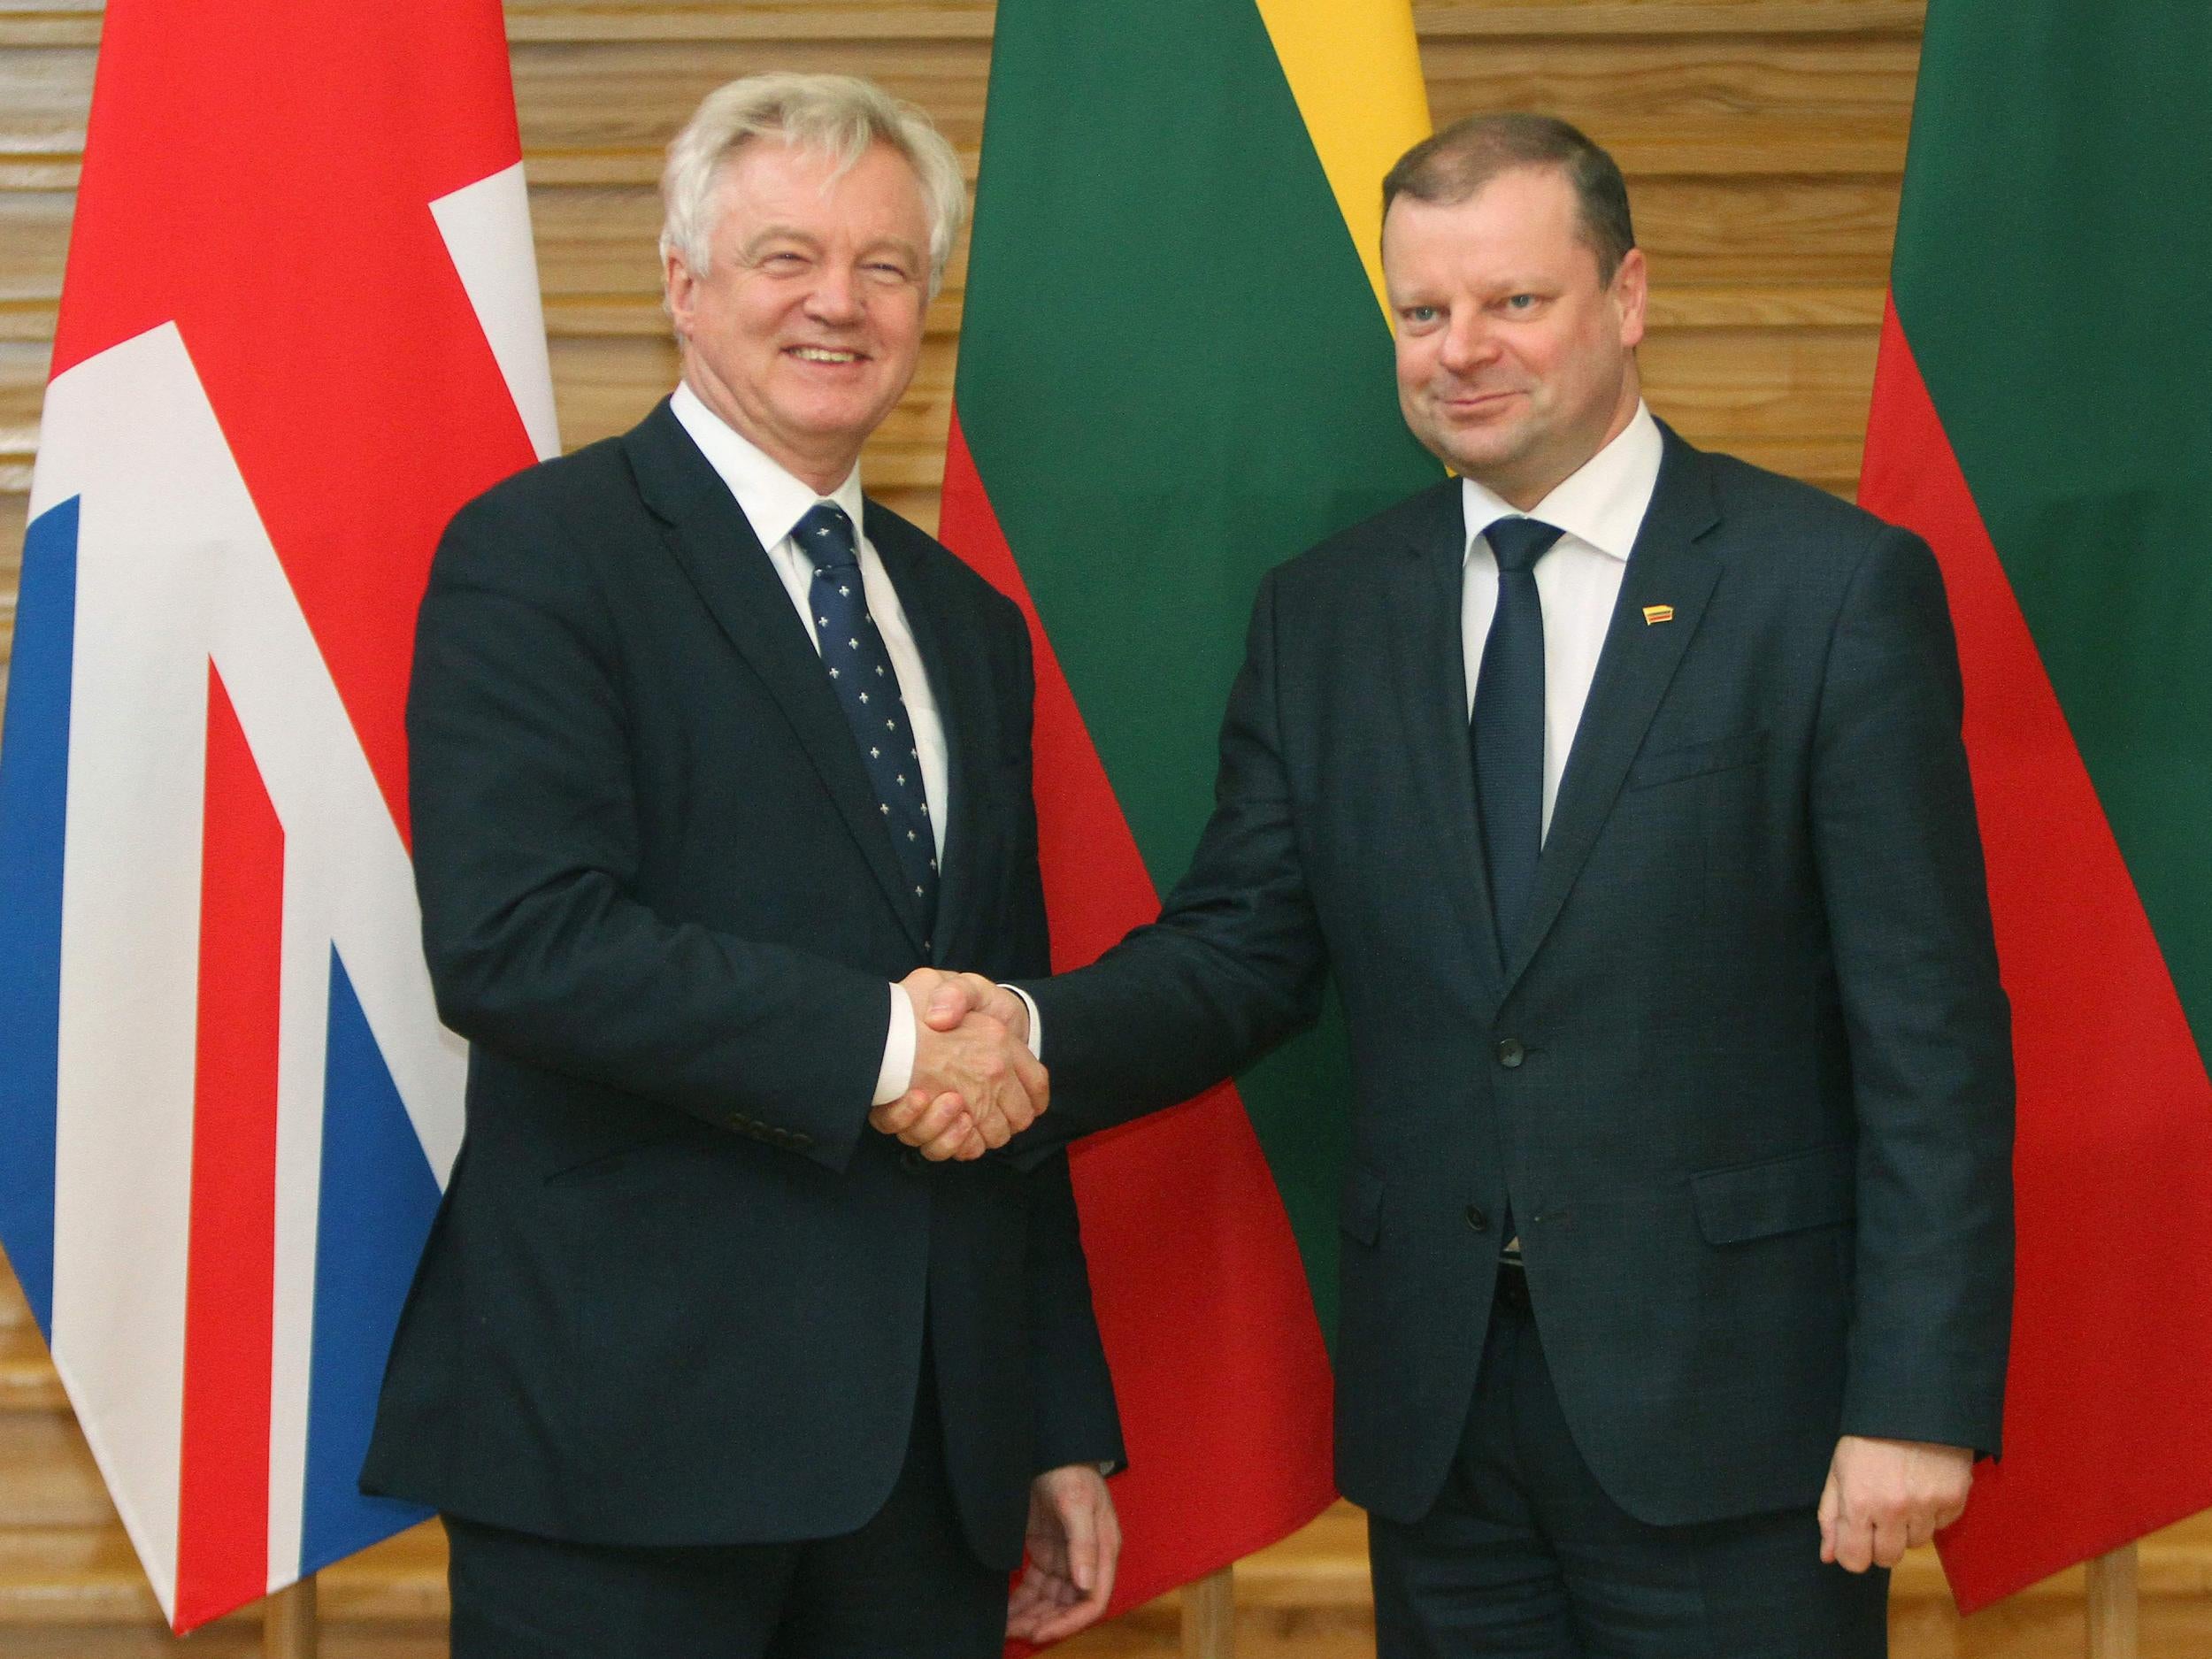 Brexit Minister David Davis shakes hands with Lithuania Prime Minister Saulius Skvernelis in Vilnius on Tuesday